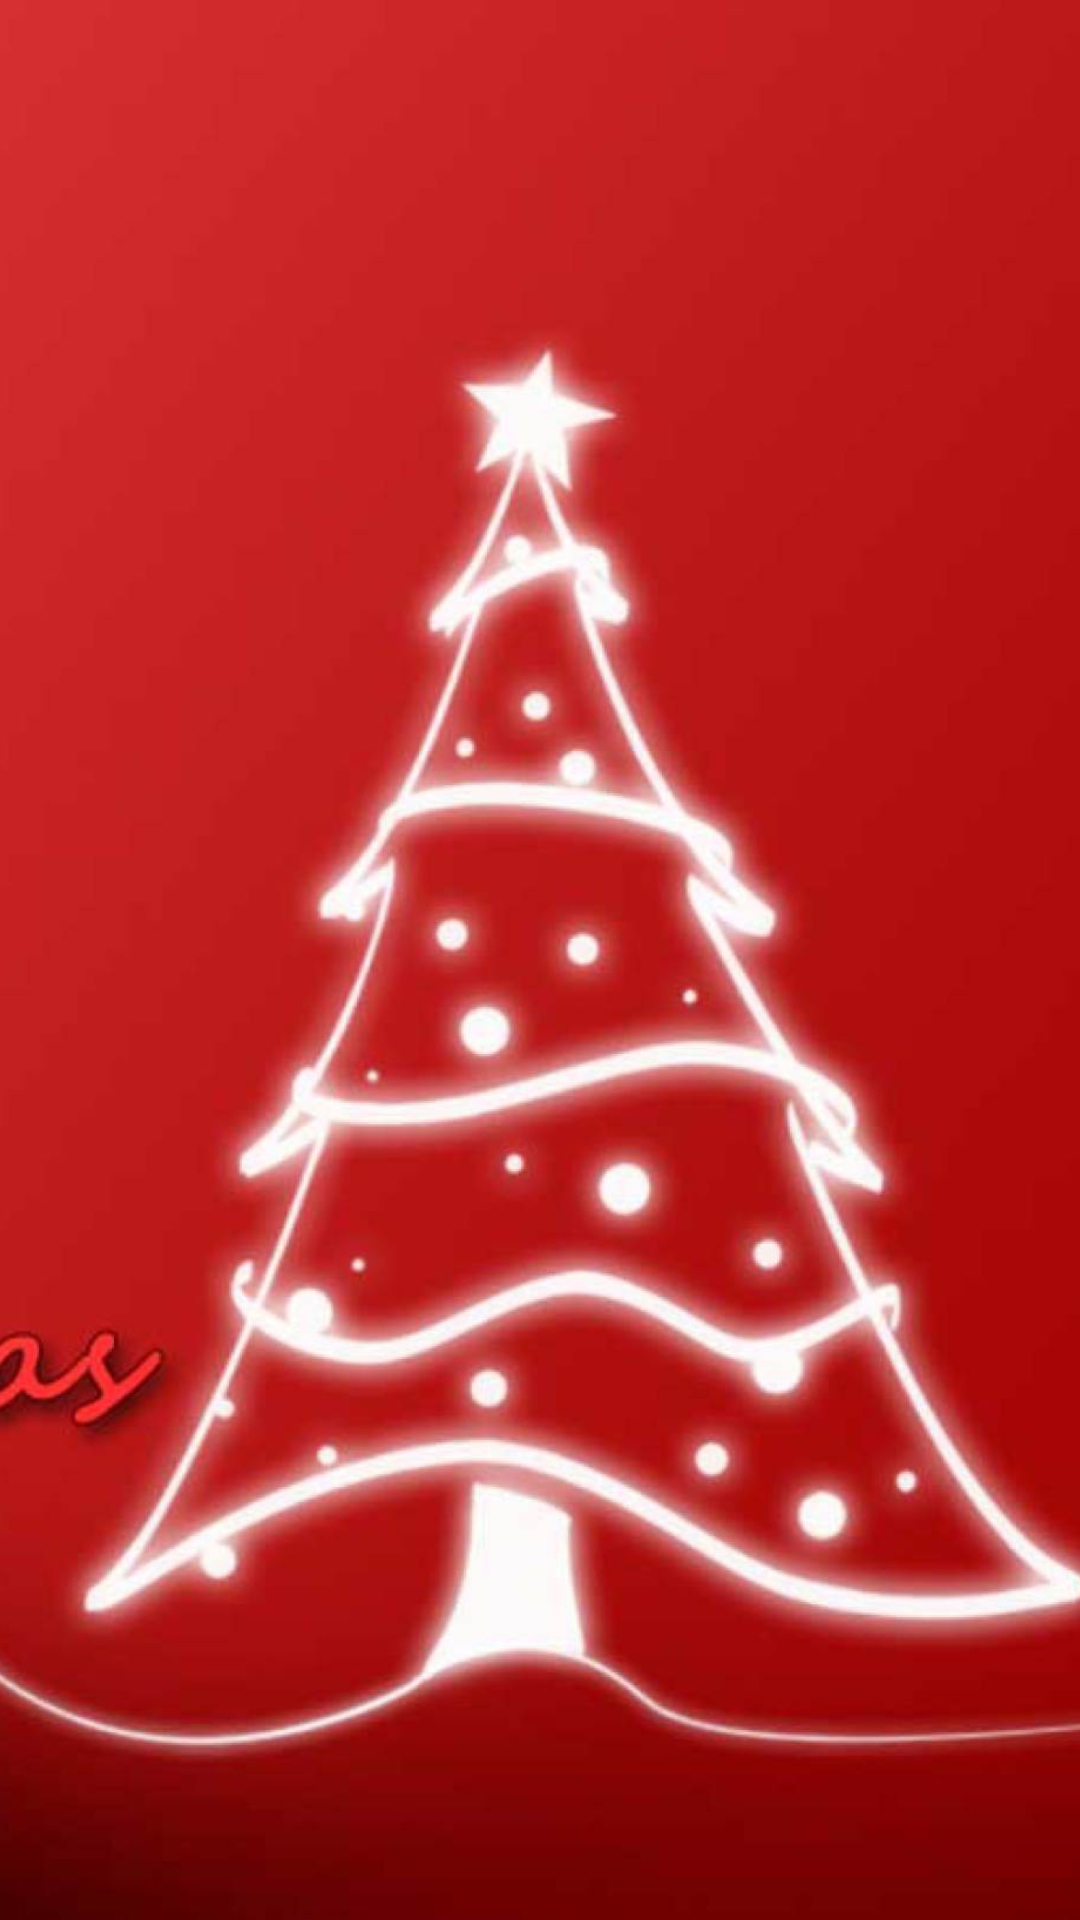 Christmas Red And White Tree wallpaper 1080x1920